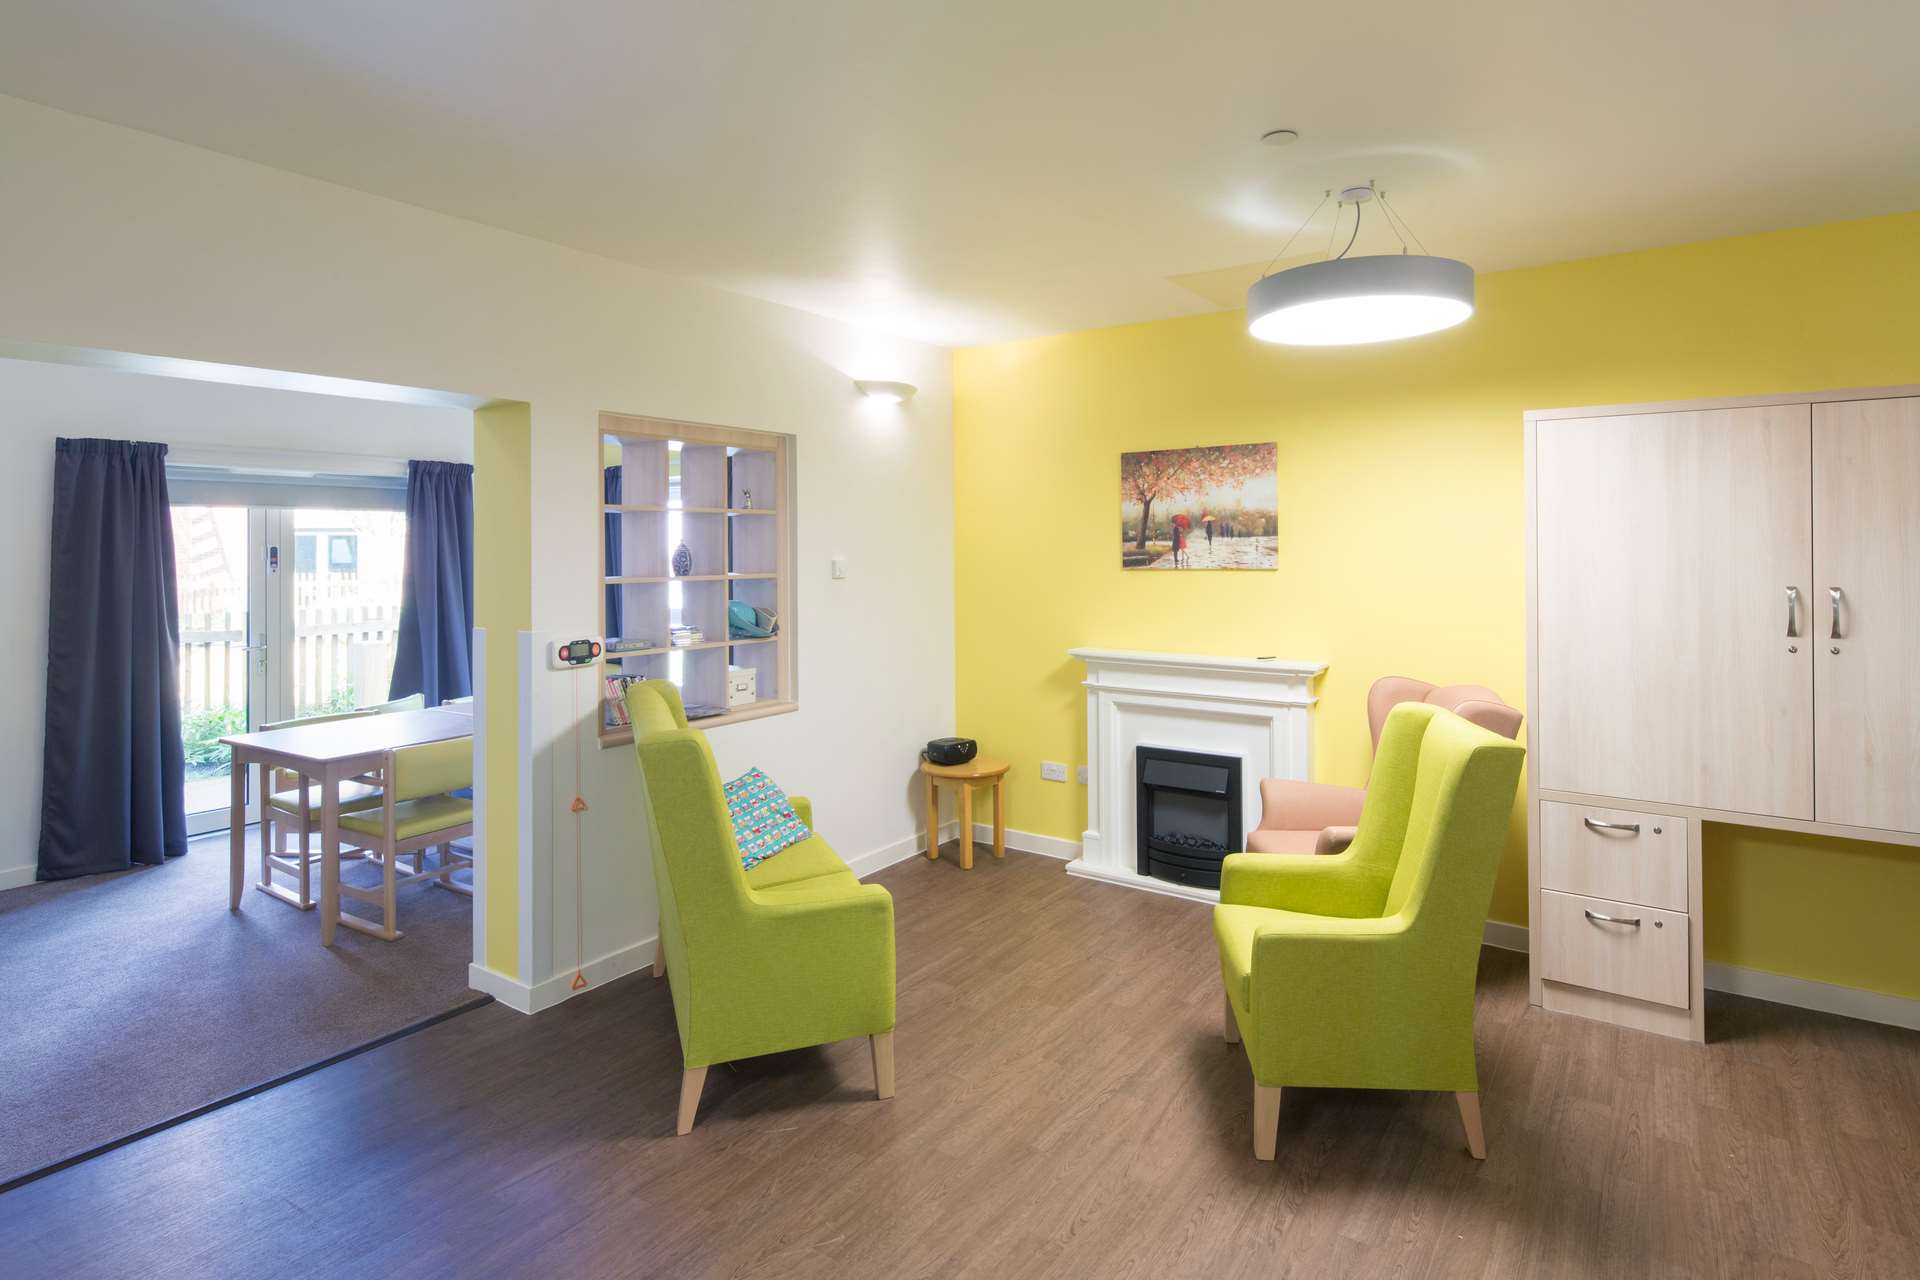 Crosslet Care Home